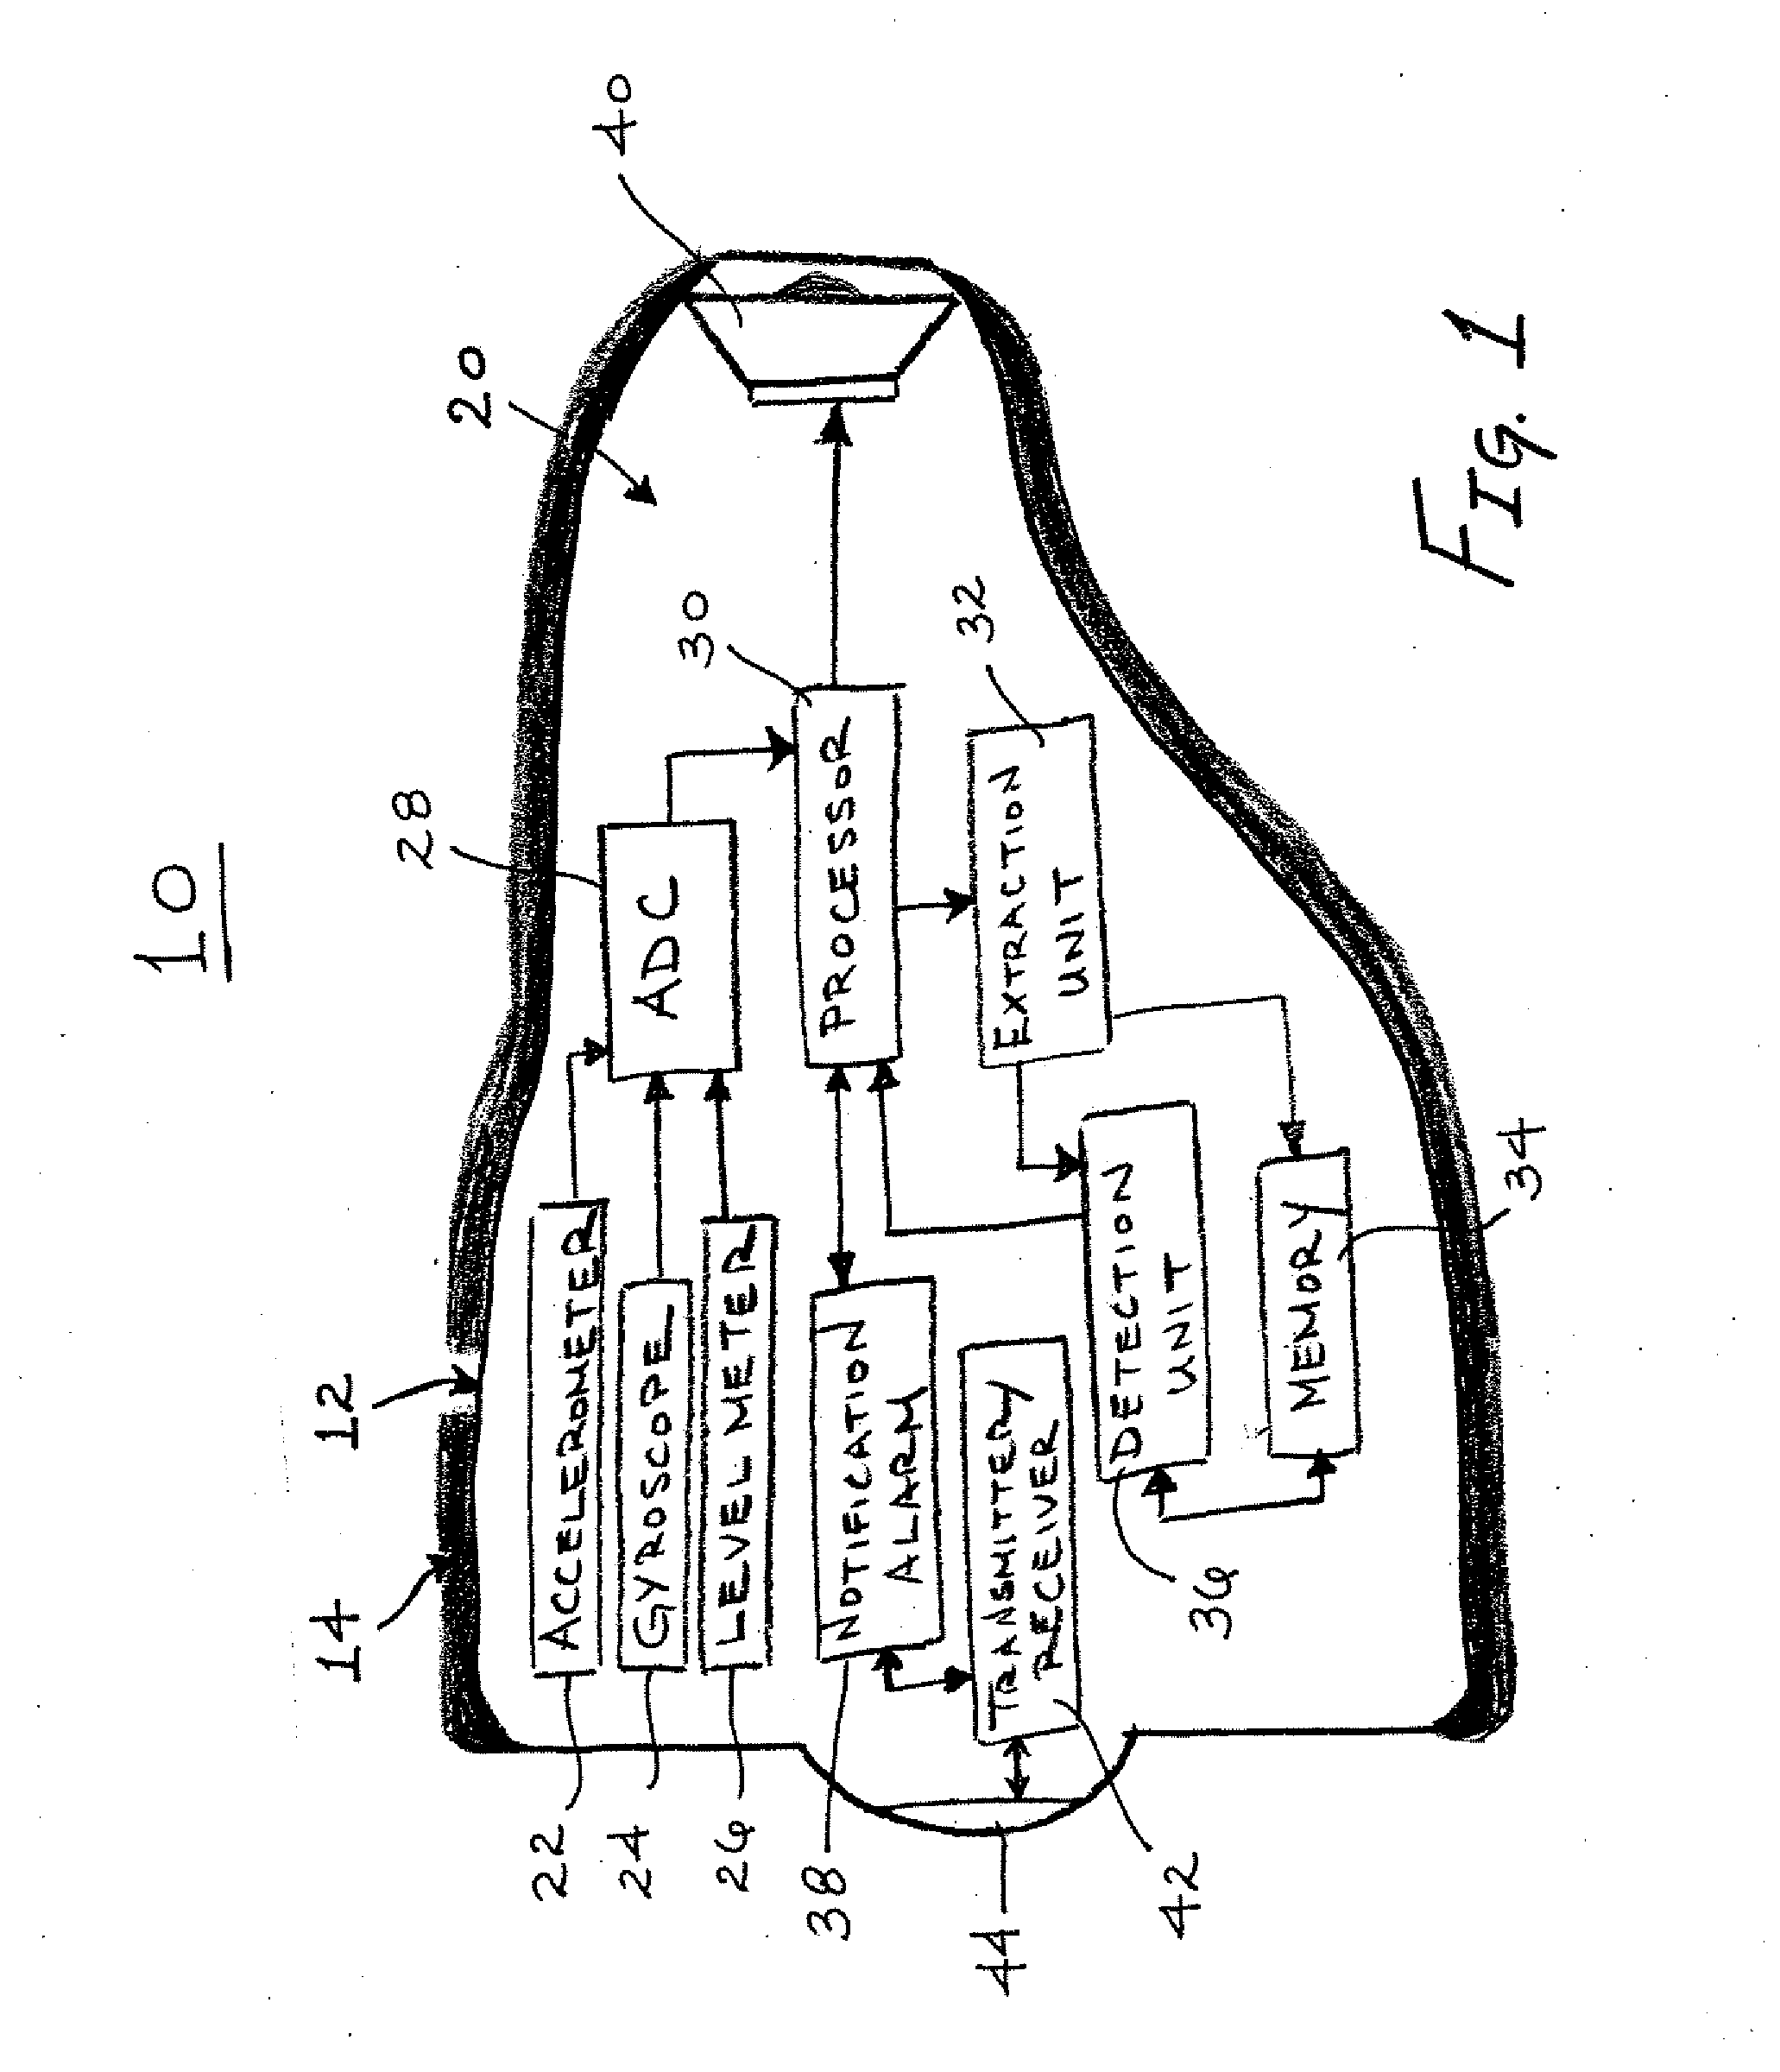 System and method for detecting deviations in nominal gait patterns